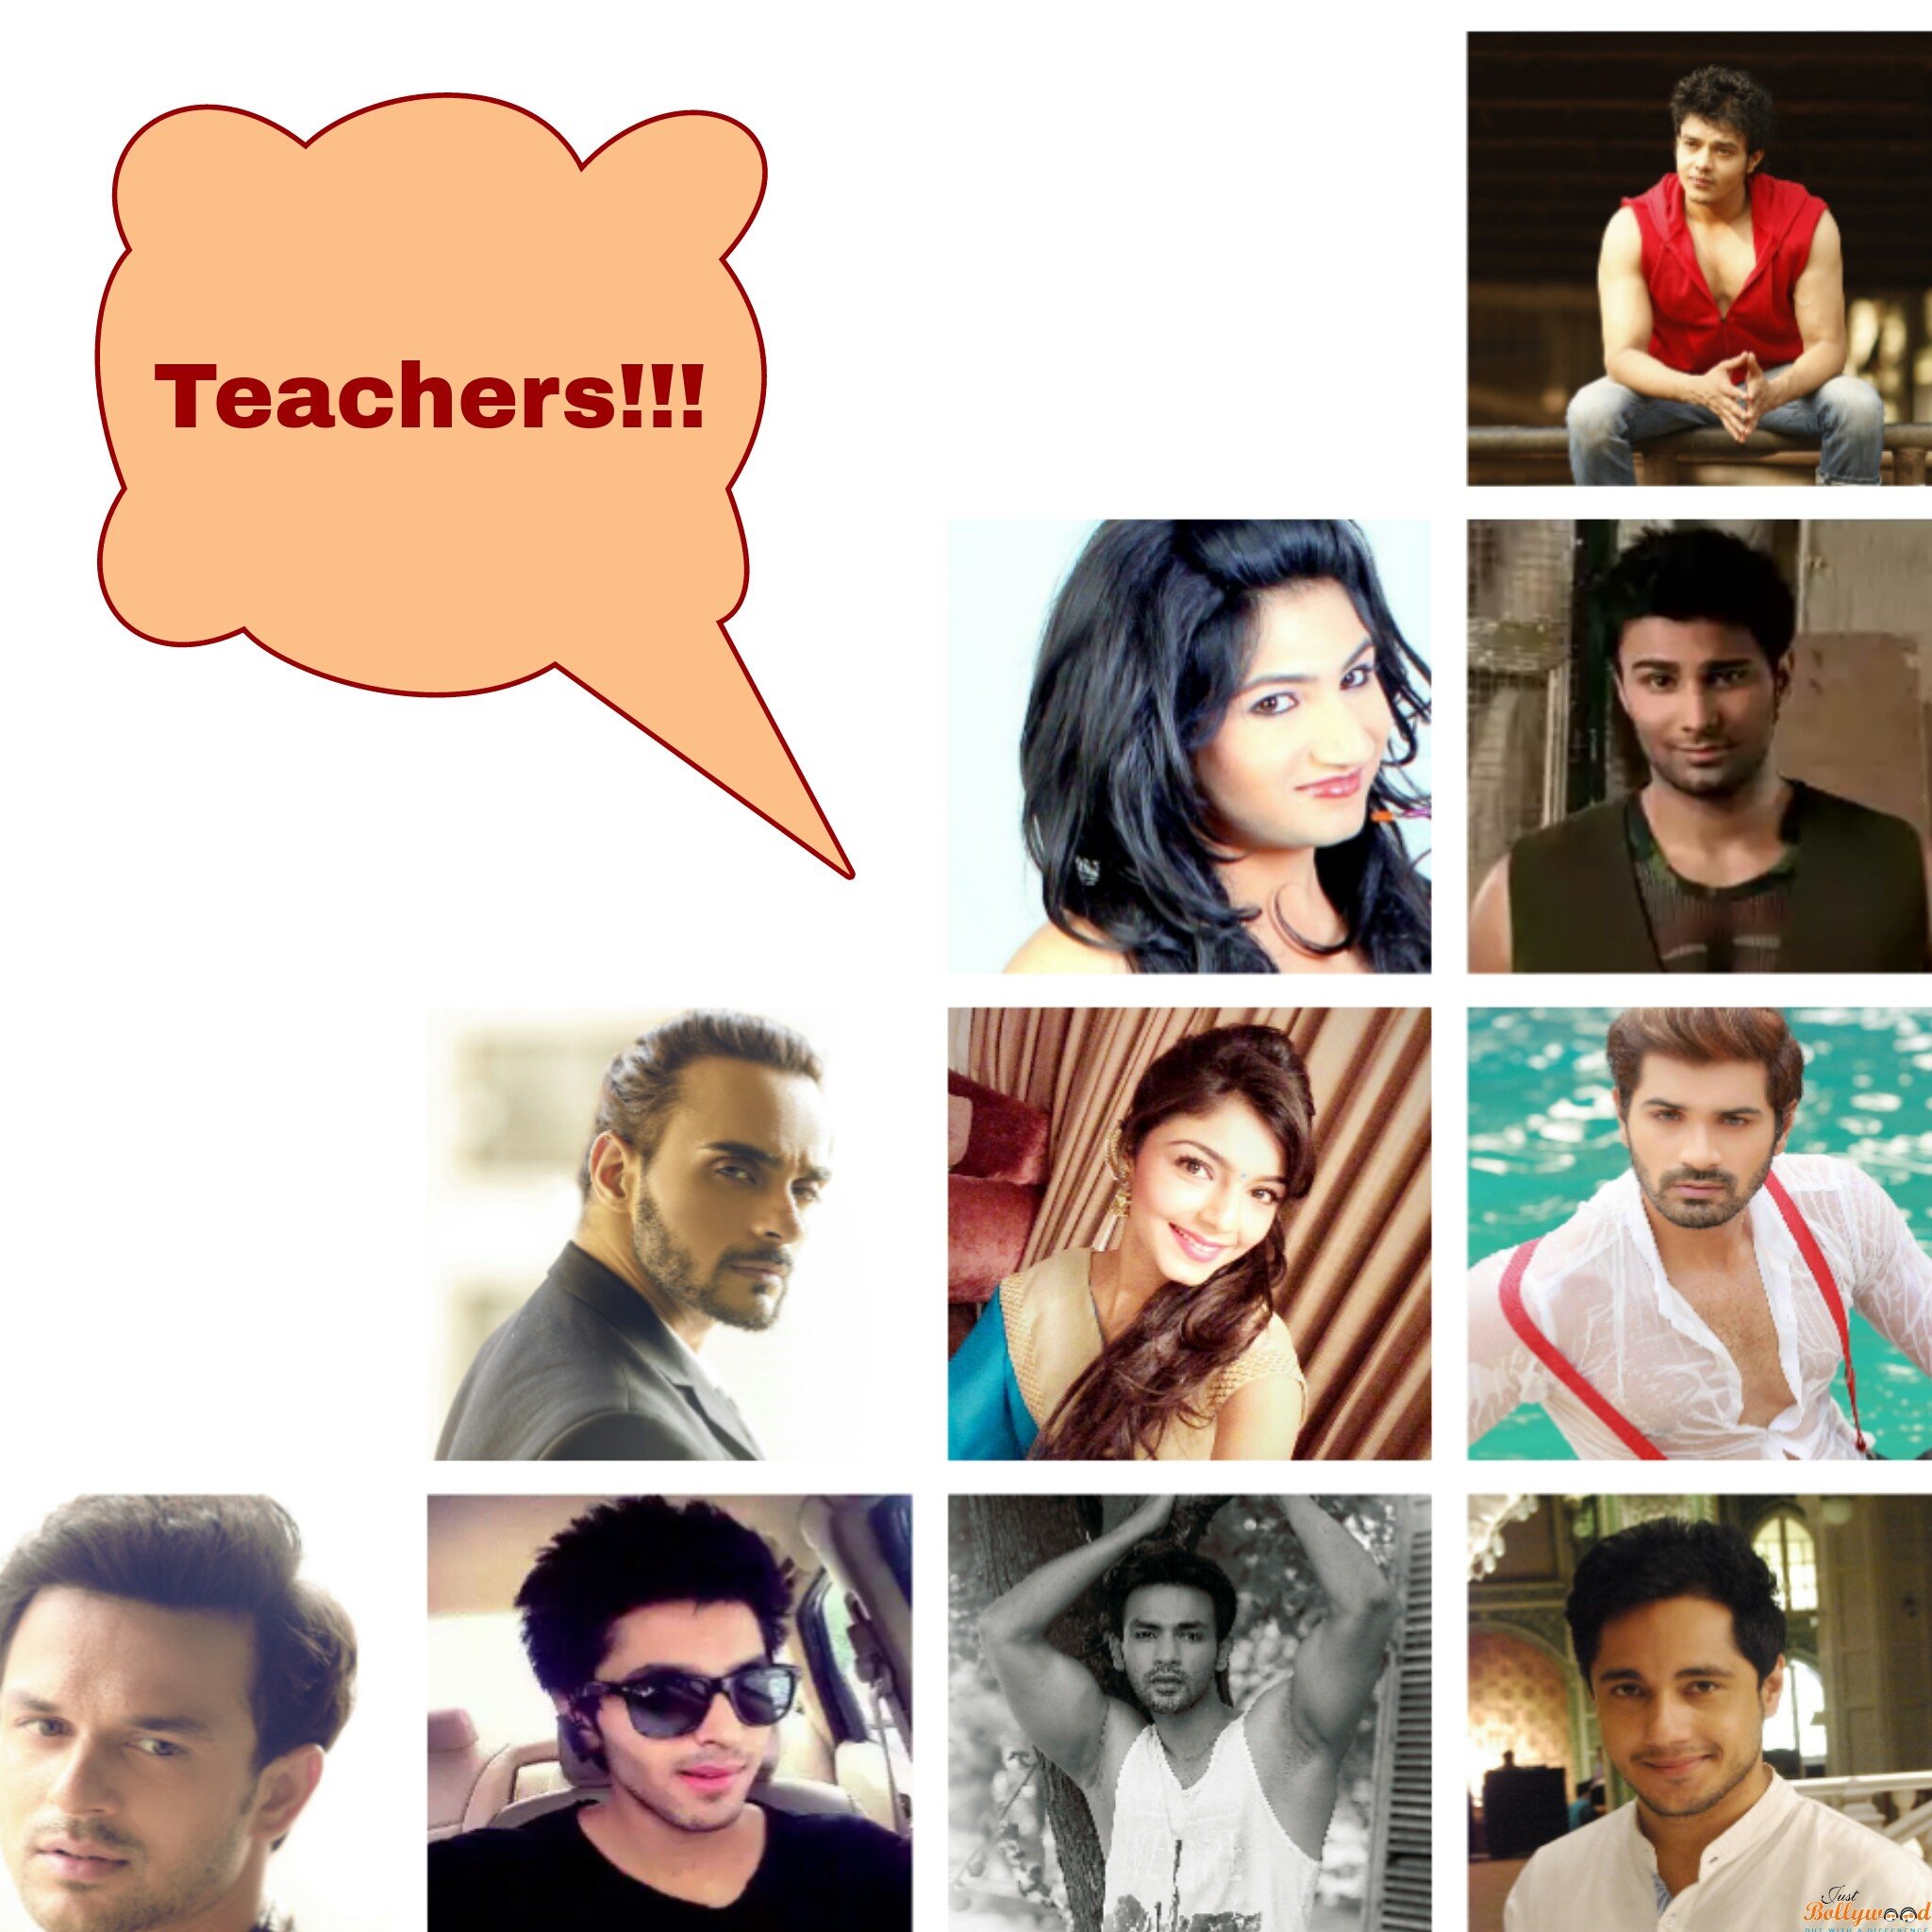 Celeb's wishes for their Teachers!